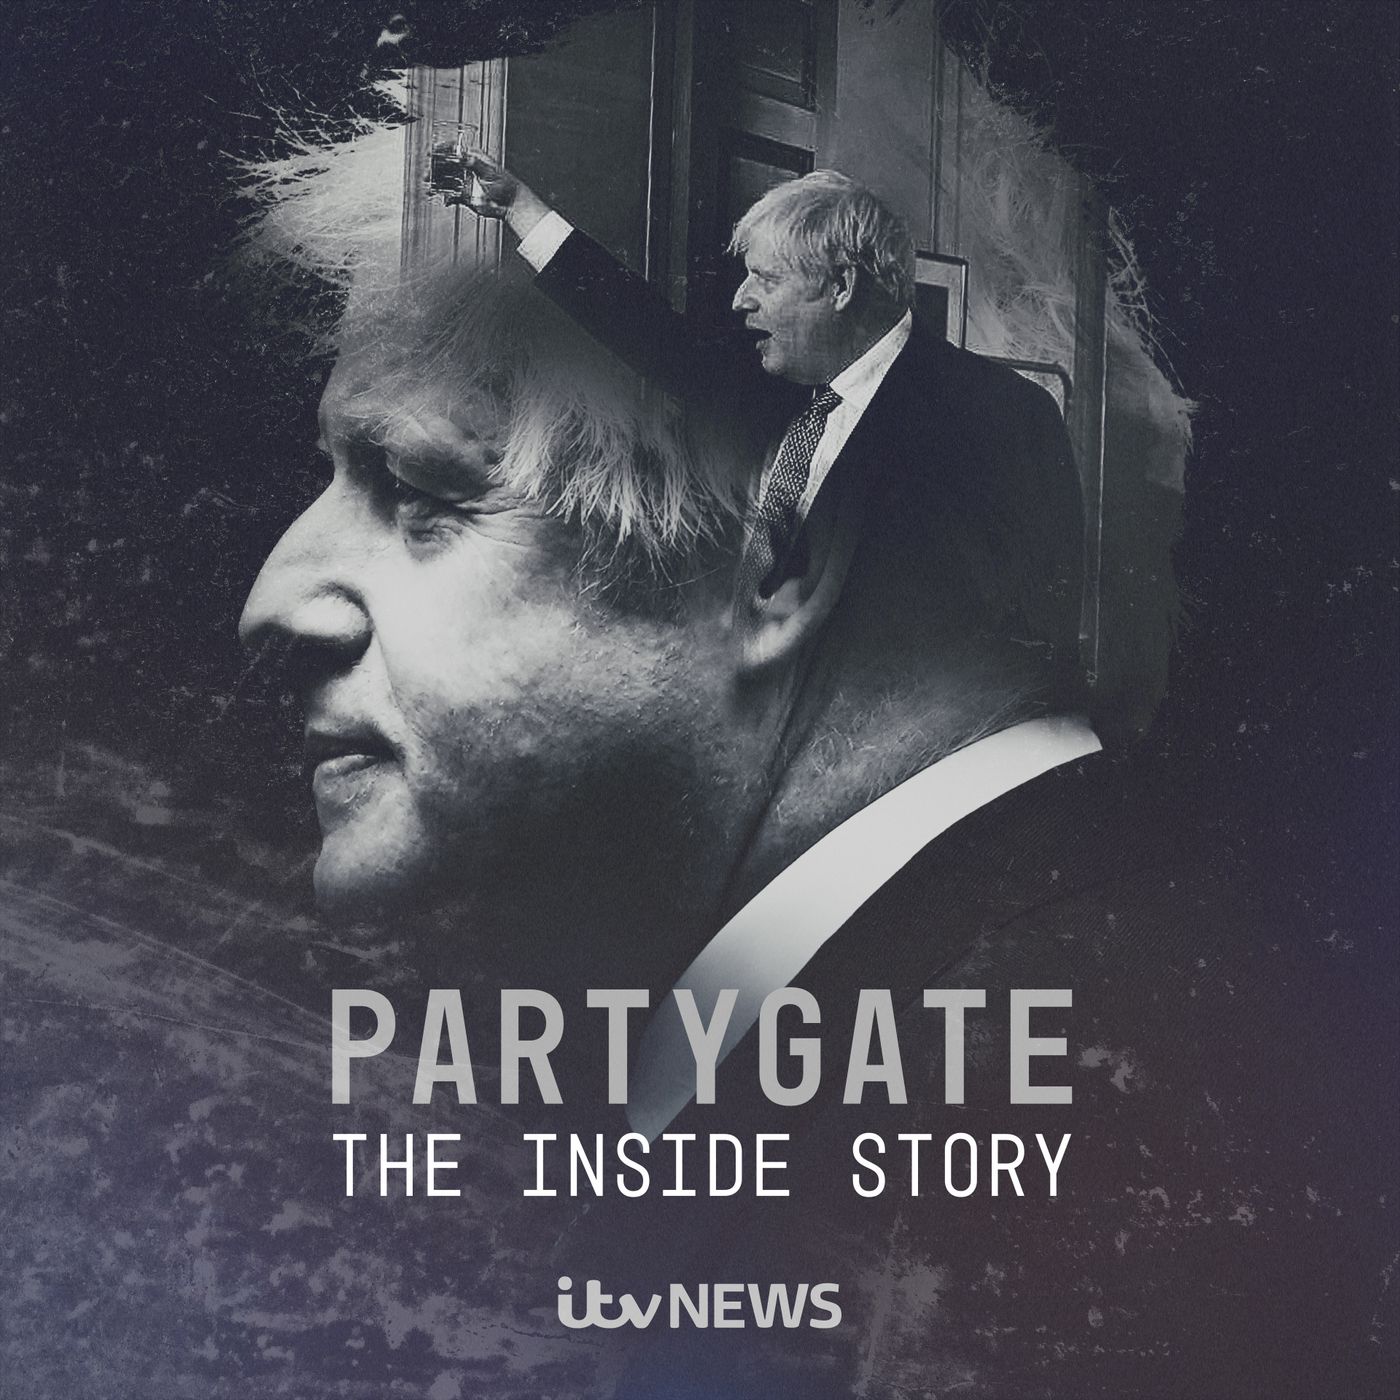 Partygate: The Inside Story podcast show image